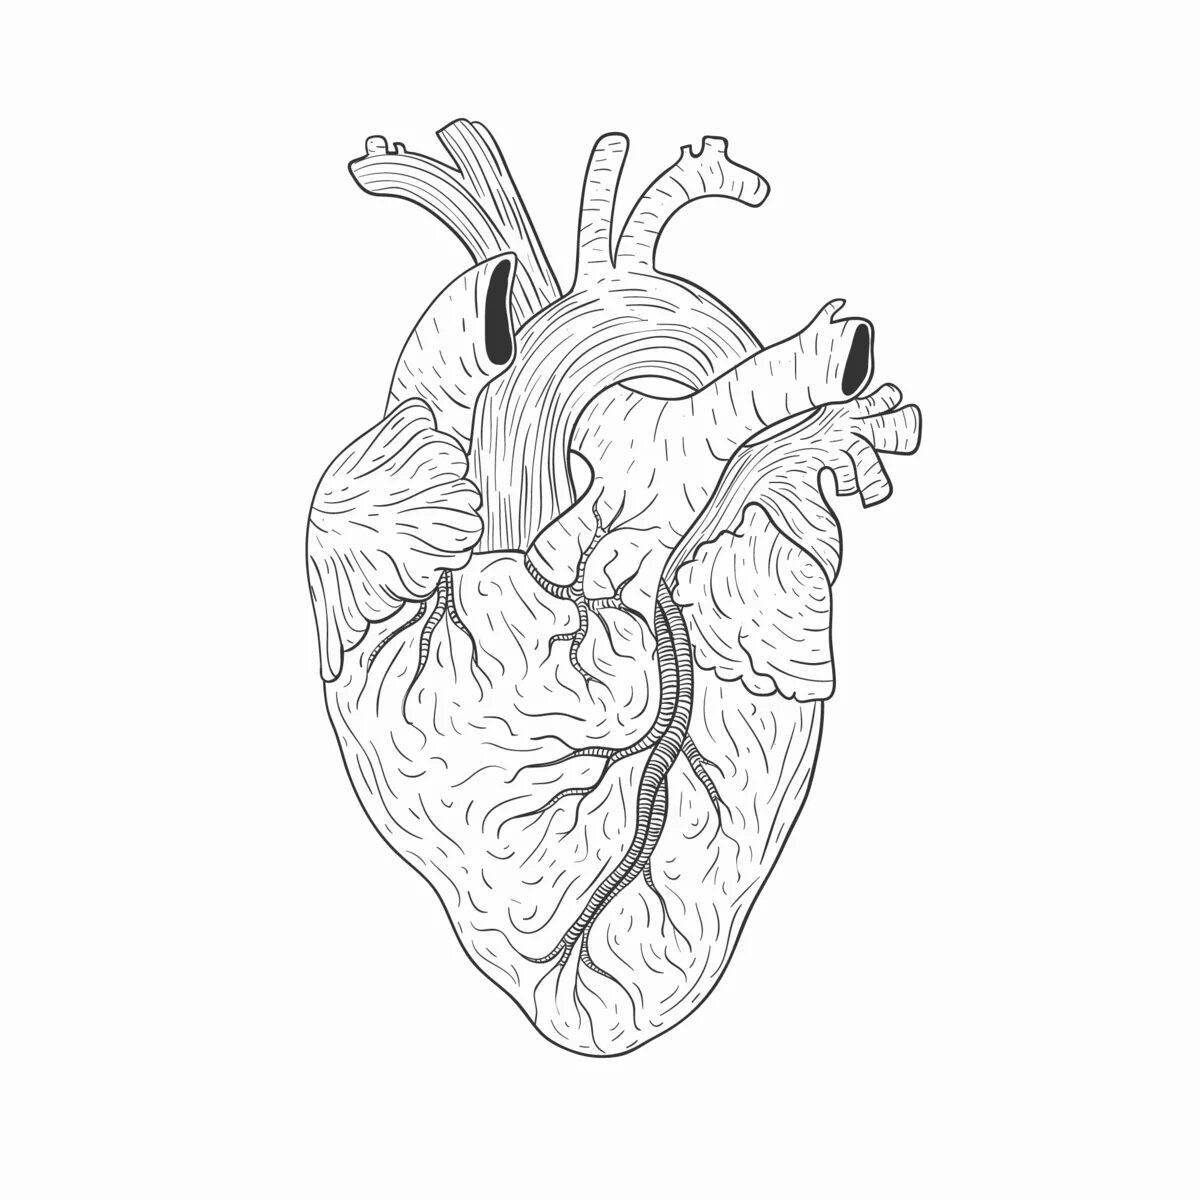 Great anatomical coloring of the heart